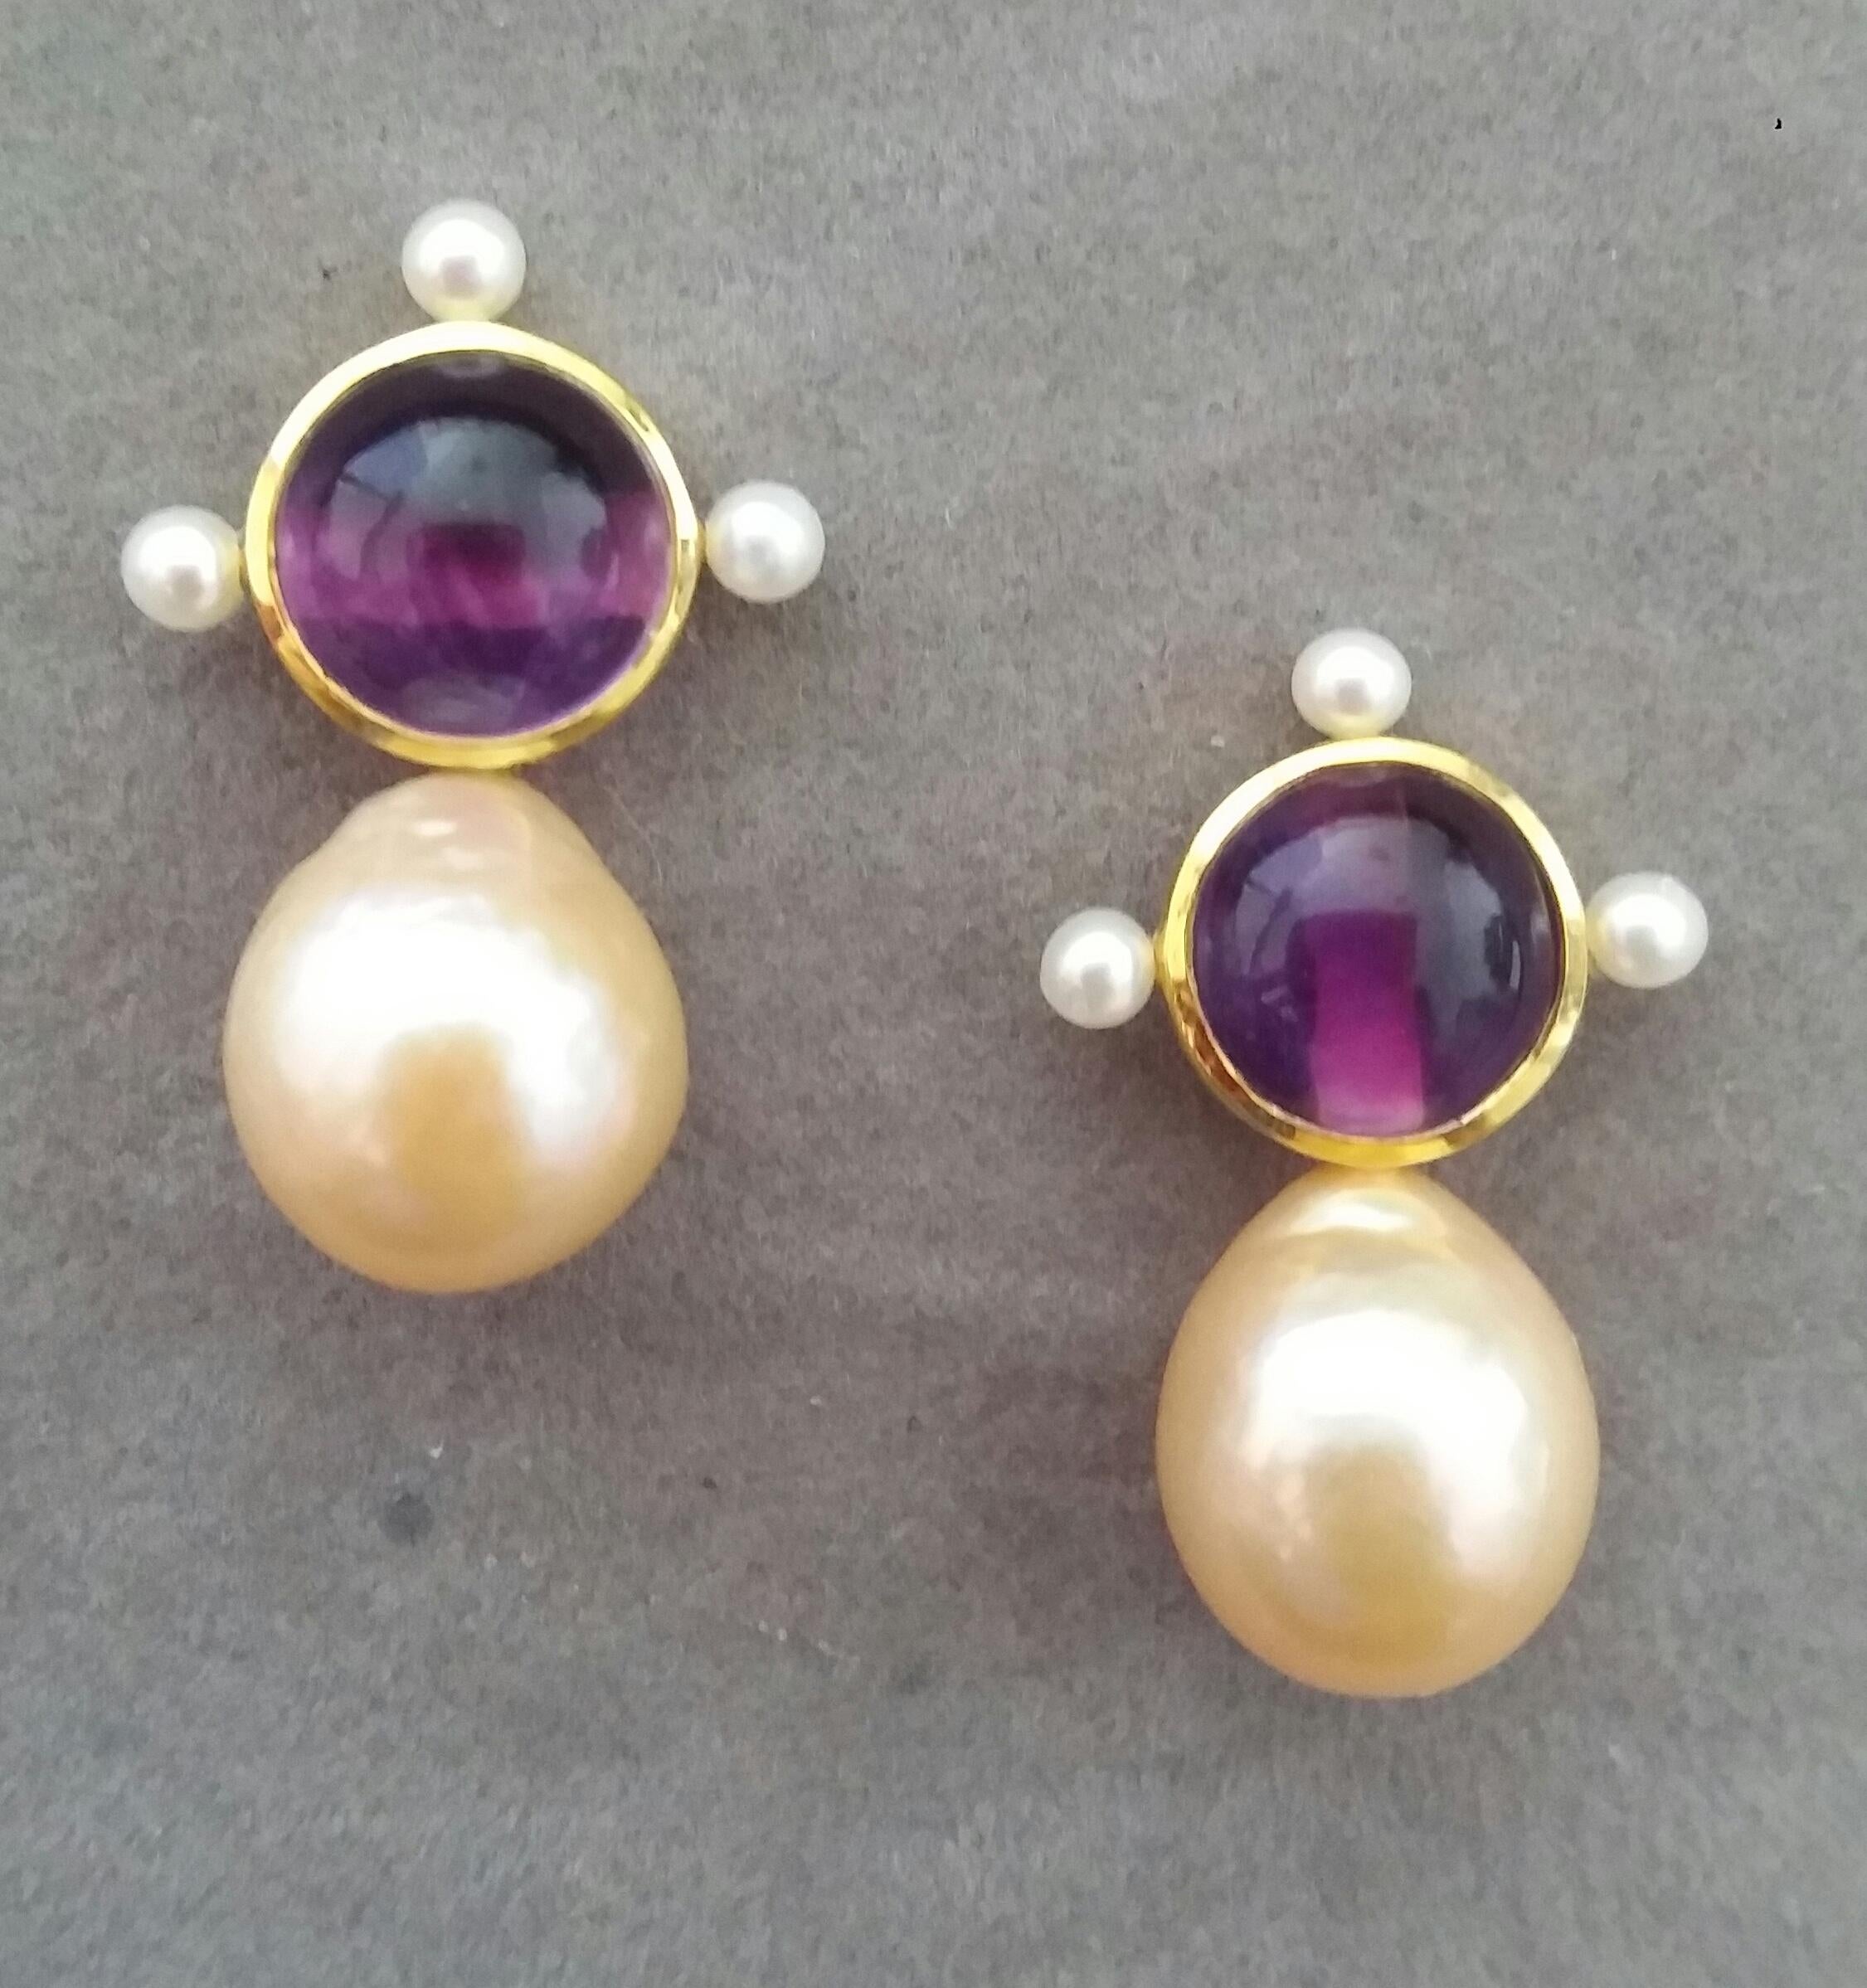 These elegant and handmade earrings have 2 Natural Amethyst round cabs measuring 10 mm in diameter set in a 14 Kt yellow gold bezel with 3 small white round pearls of 3 mm on 3 sides at the top to which are suspended 2 Natural Golden Color Pear